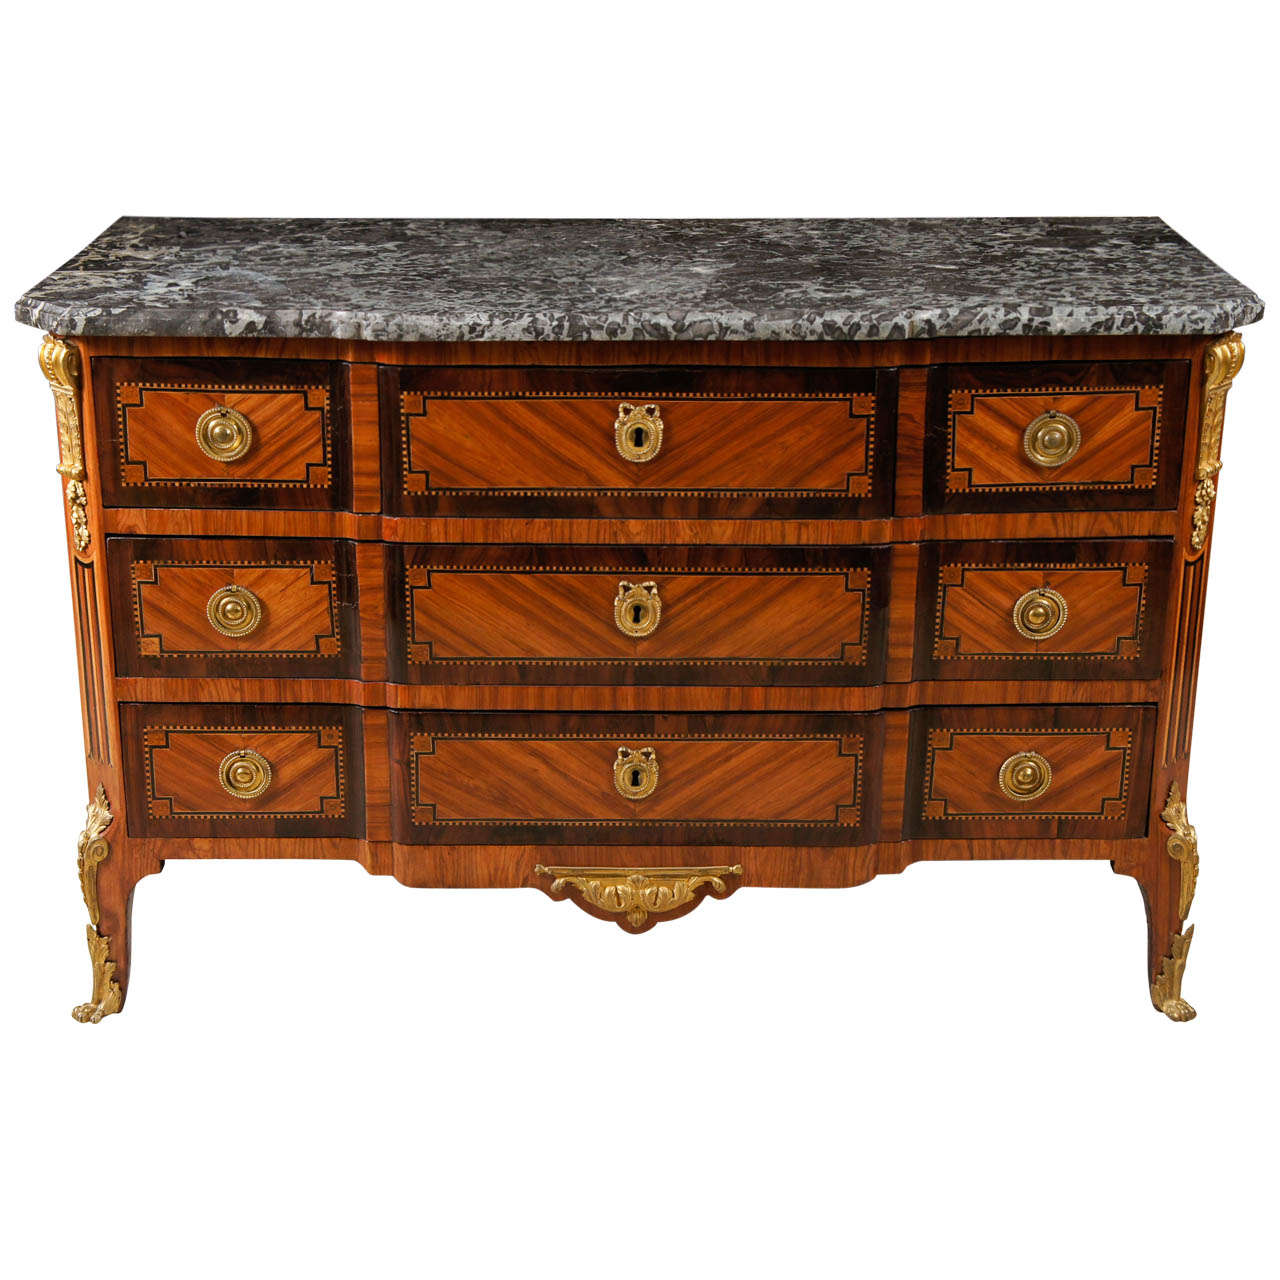 18th C. Transitional  Louis XV to Louis XVI Marquetry Marble Topped Commode For Sale